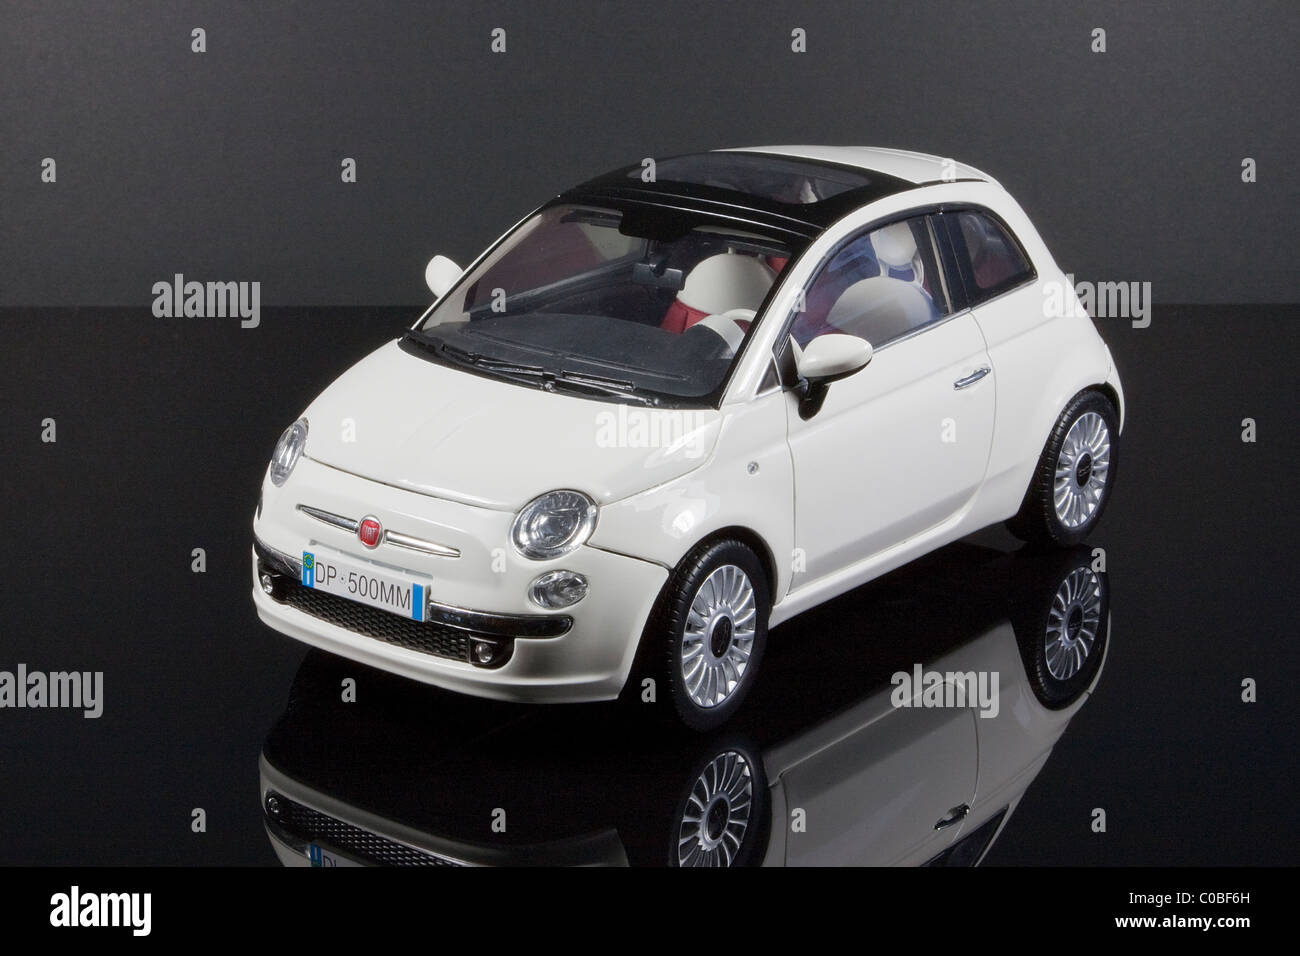 Model of a Fiat 500 saloon. Stock Photo